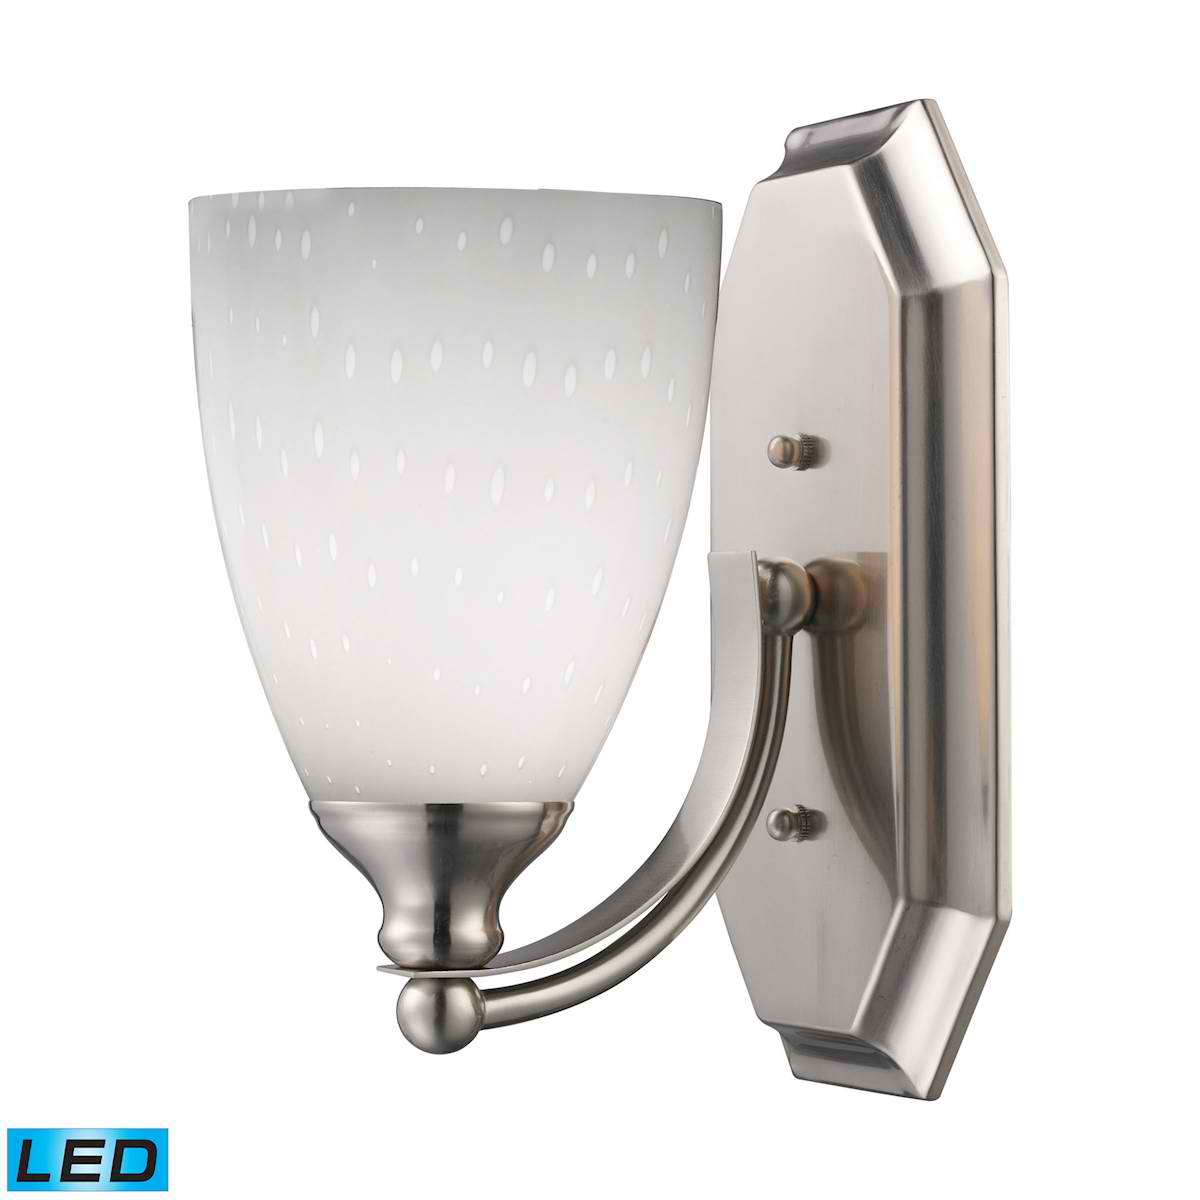 1 Light Vanity in Satin Nickel and Simply White Glass - LED Offering Up To 800 Lumens (60 Watt Equivalent)